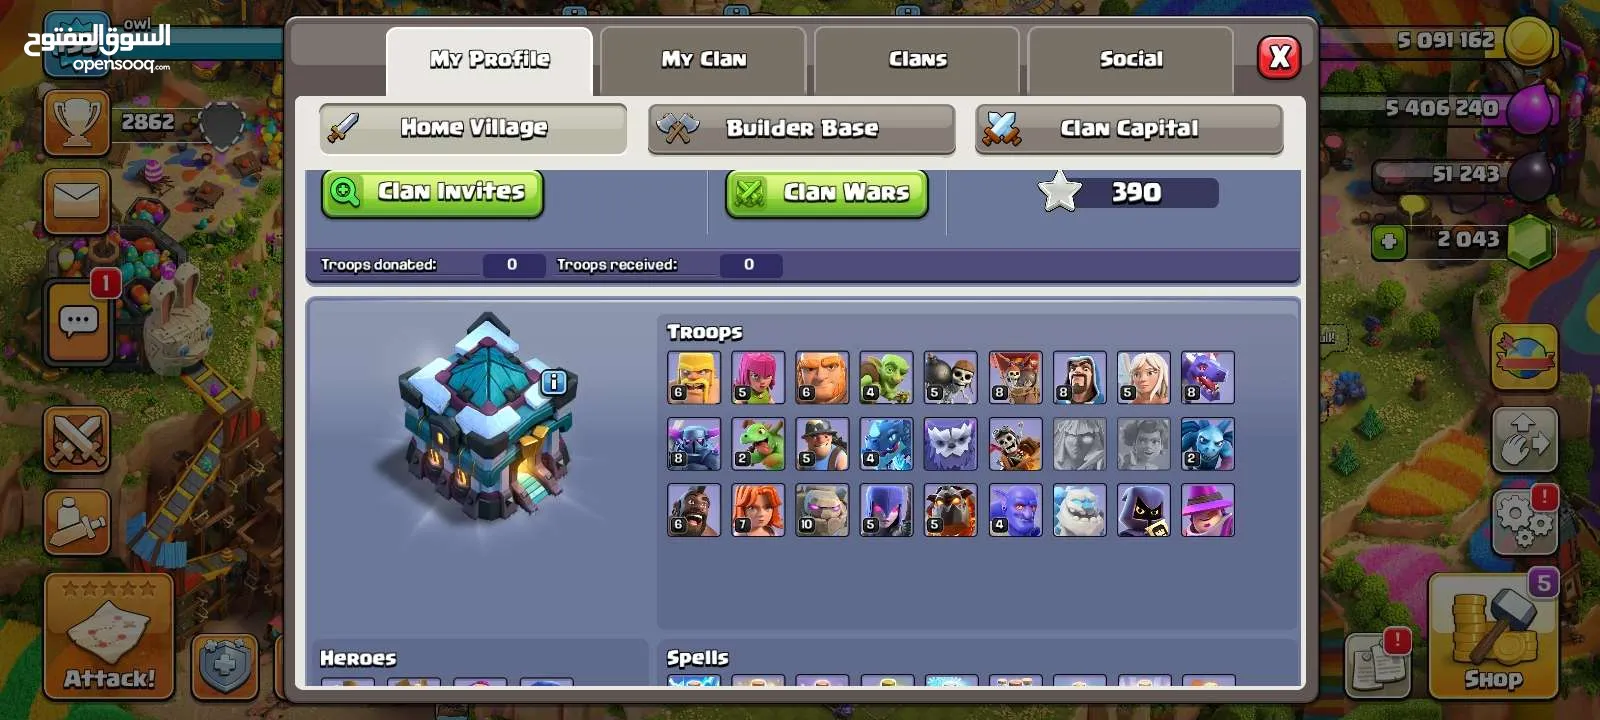 2016 Clash of Clans account for cheap